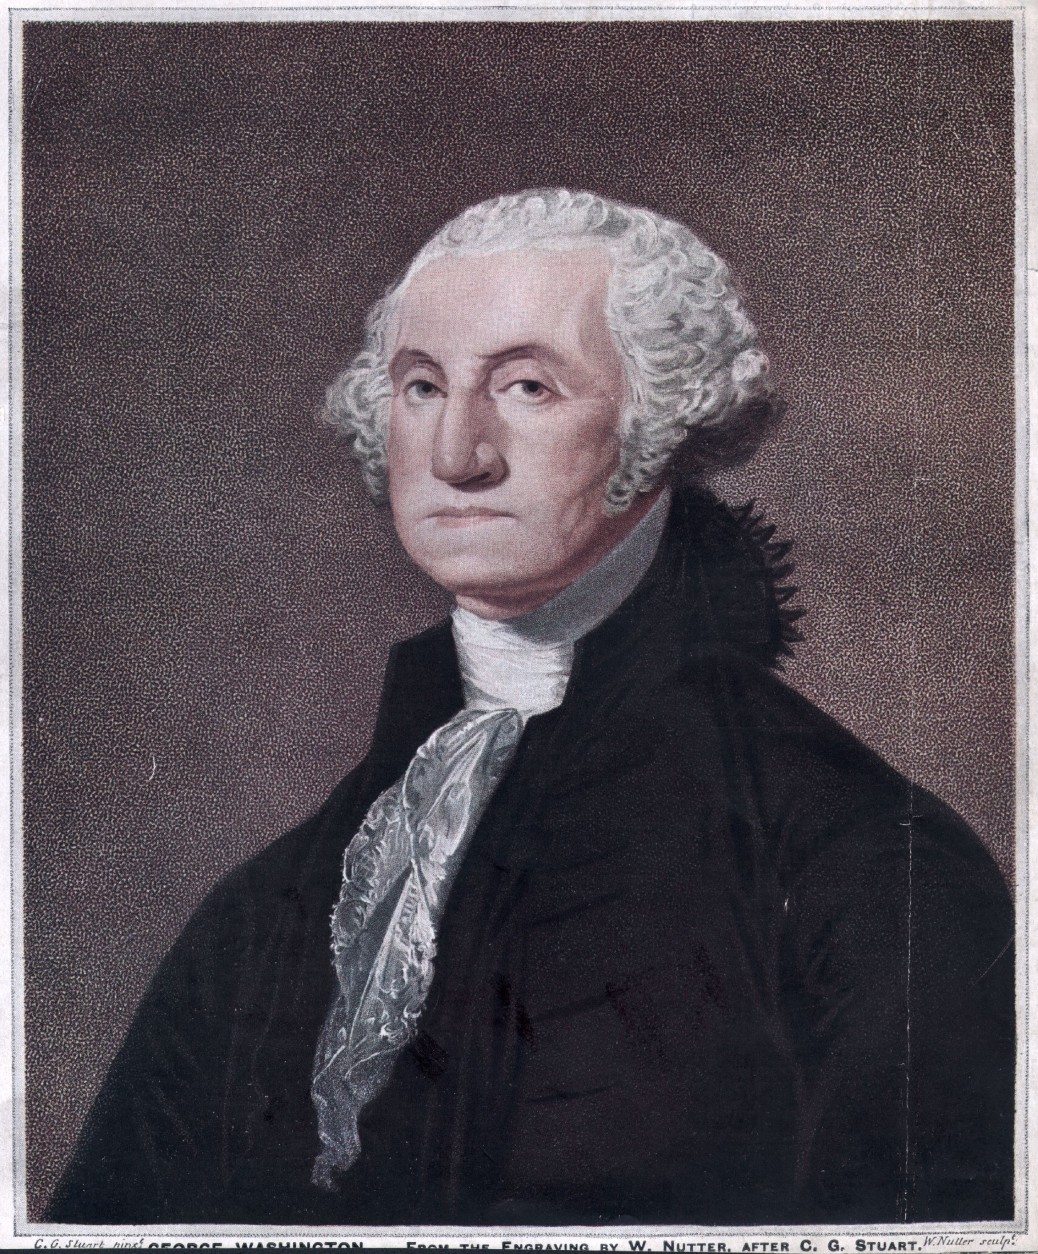 circa 1790:  George Washington, the 1st President of the United States of America.  Original Publication: From the engraving by W Nutter, after CG Stuart.  (Photo by Hulton Archive/Getty Images)